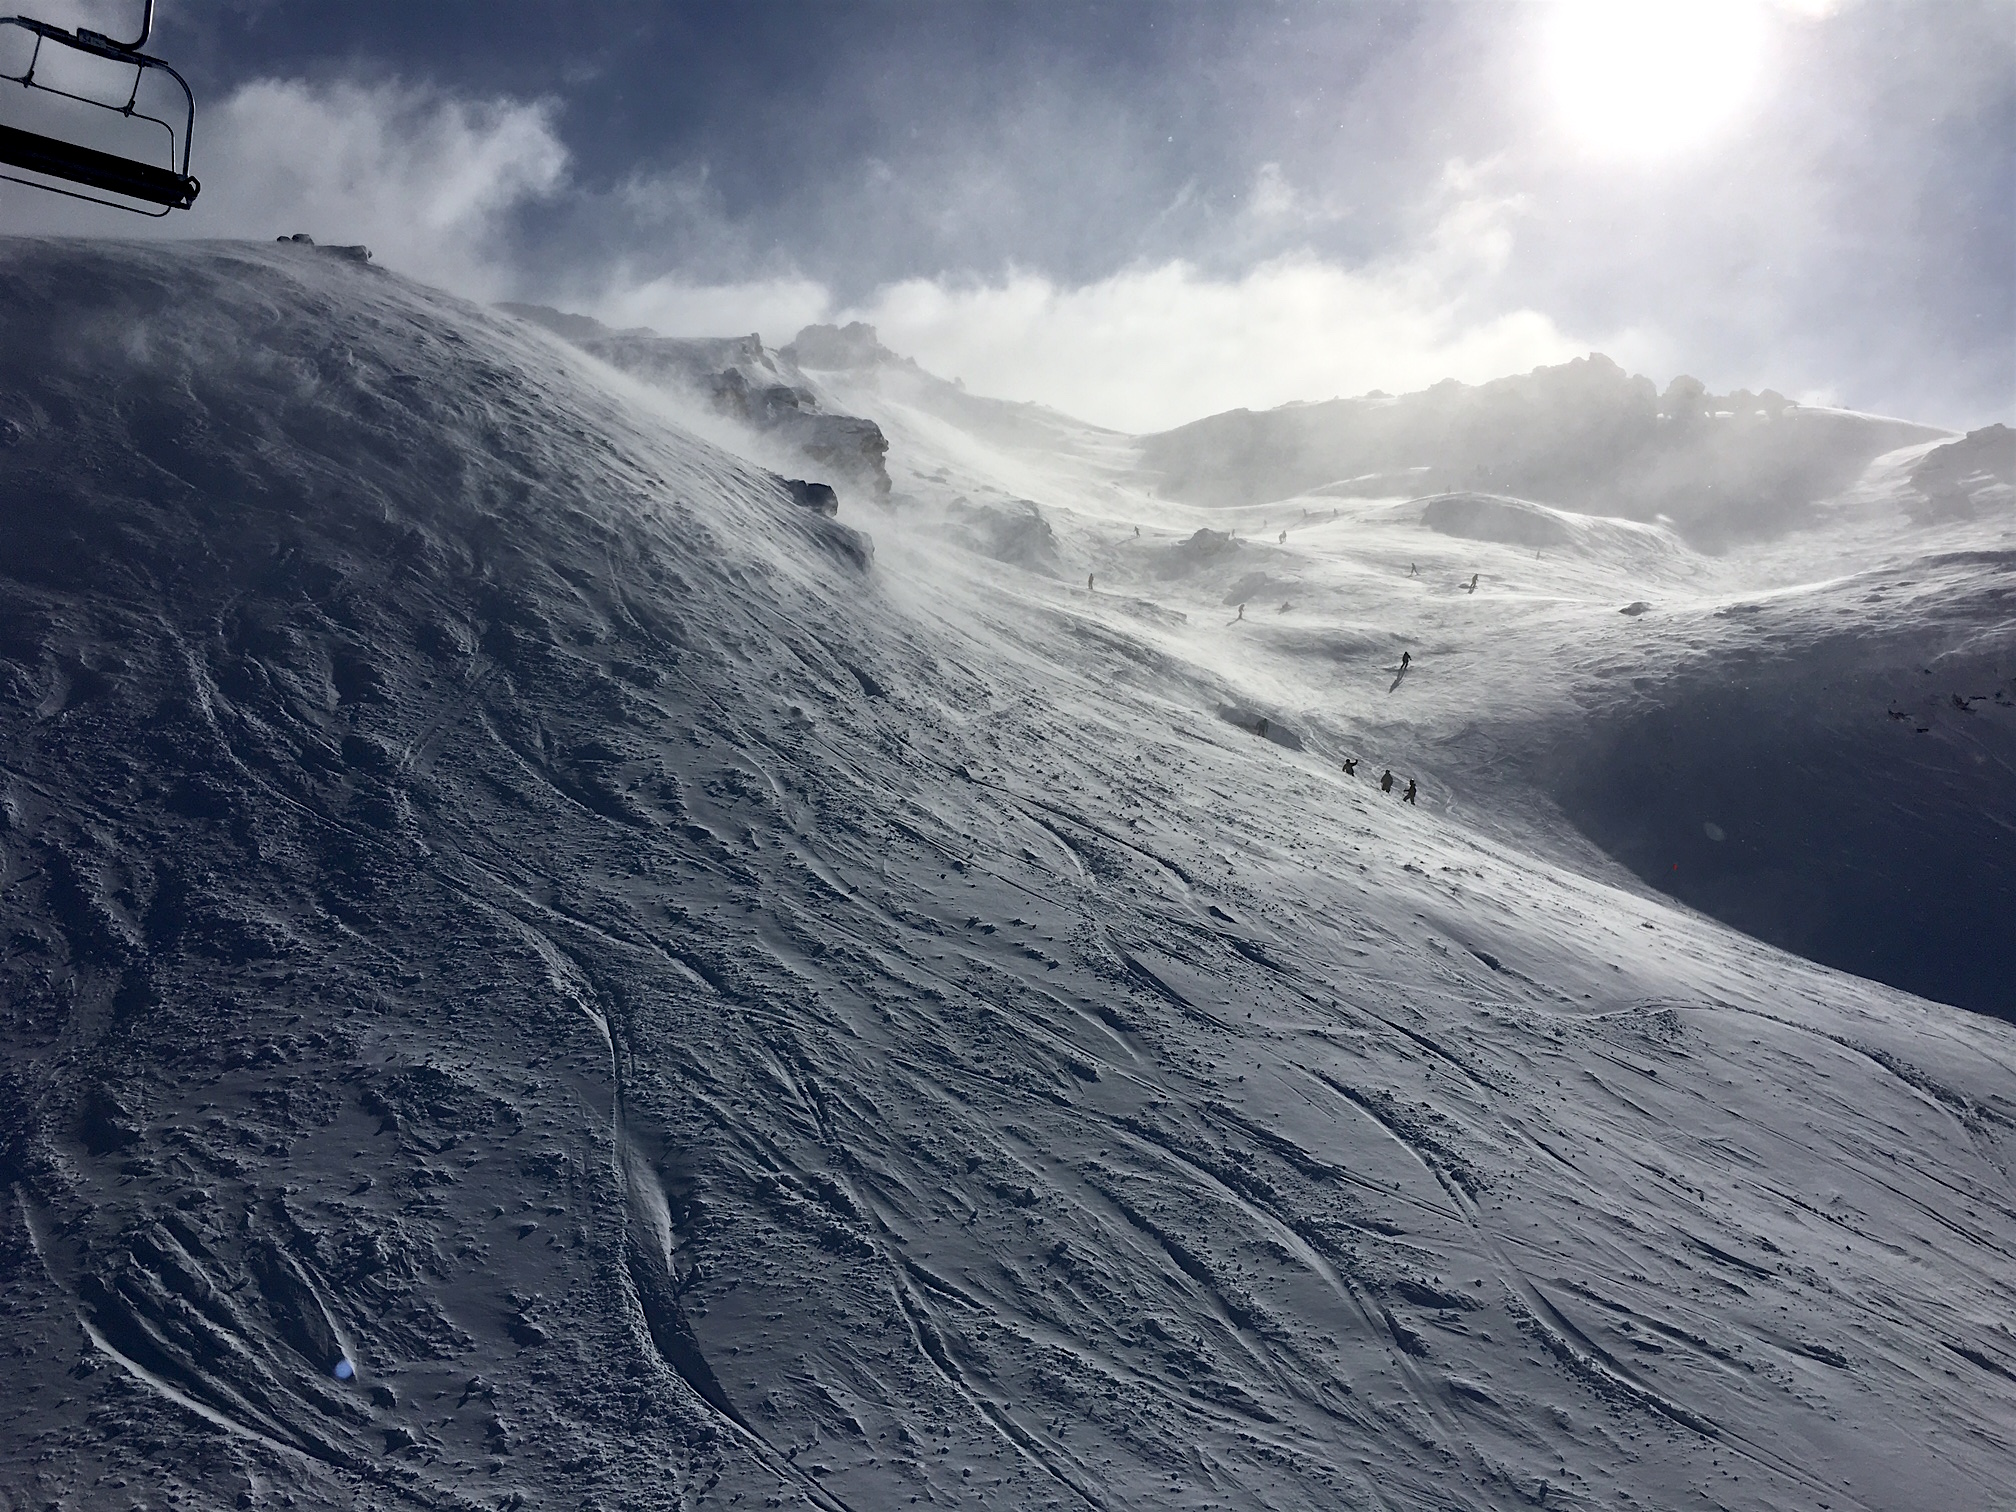 Cardrona on July 14th, 2016. photo: guy ladouche/snowbrains